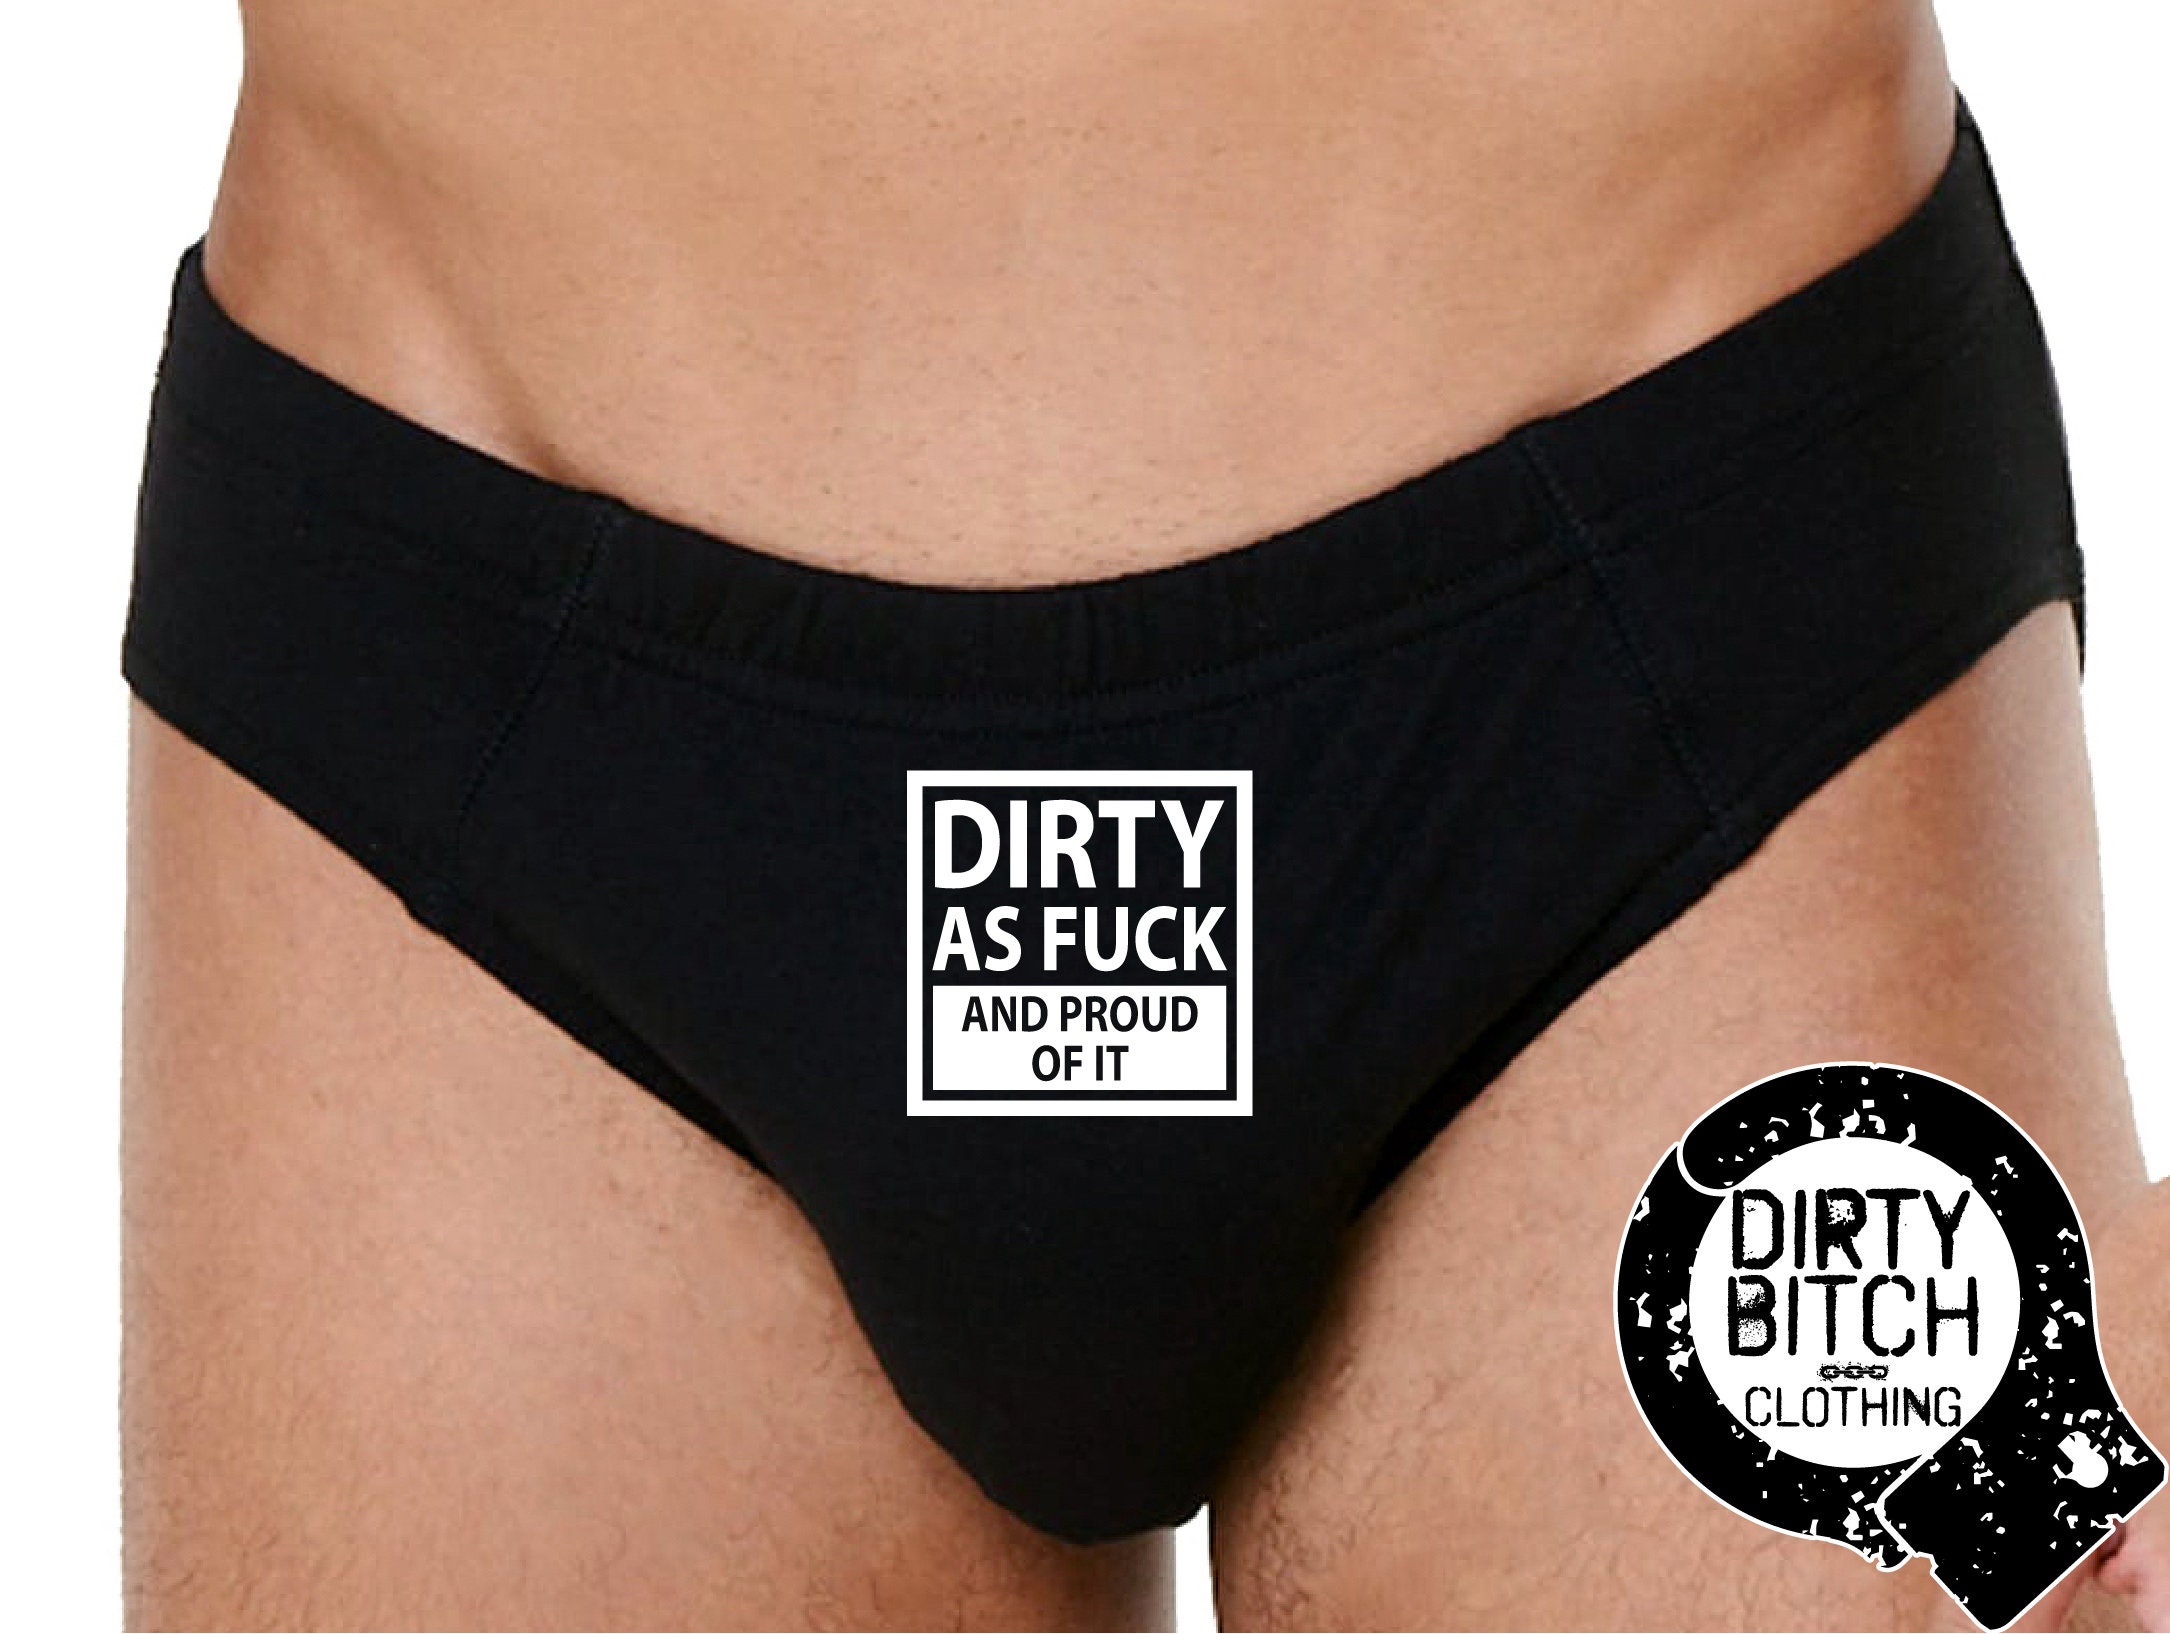 Dirty as Fuck and Proud of It Mens Underwear Adult Fetish image